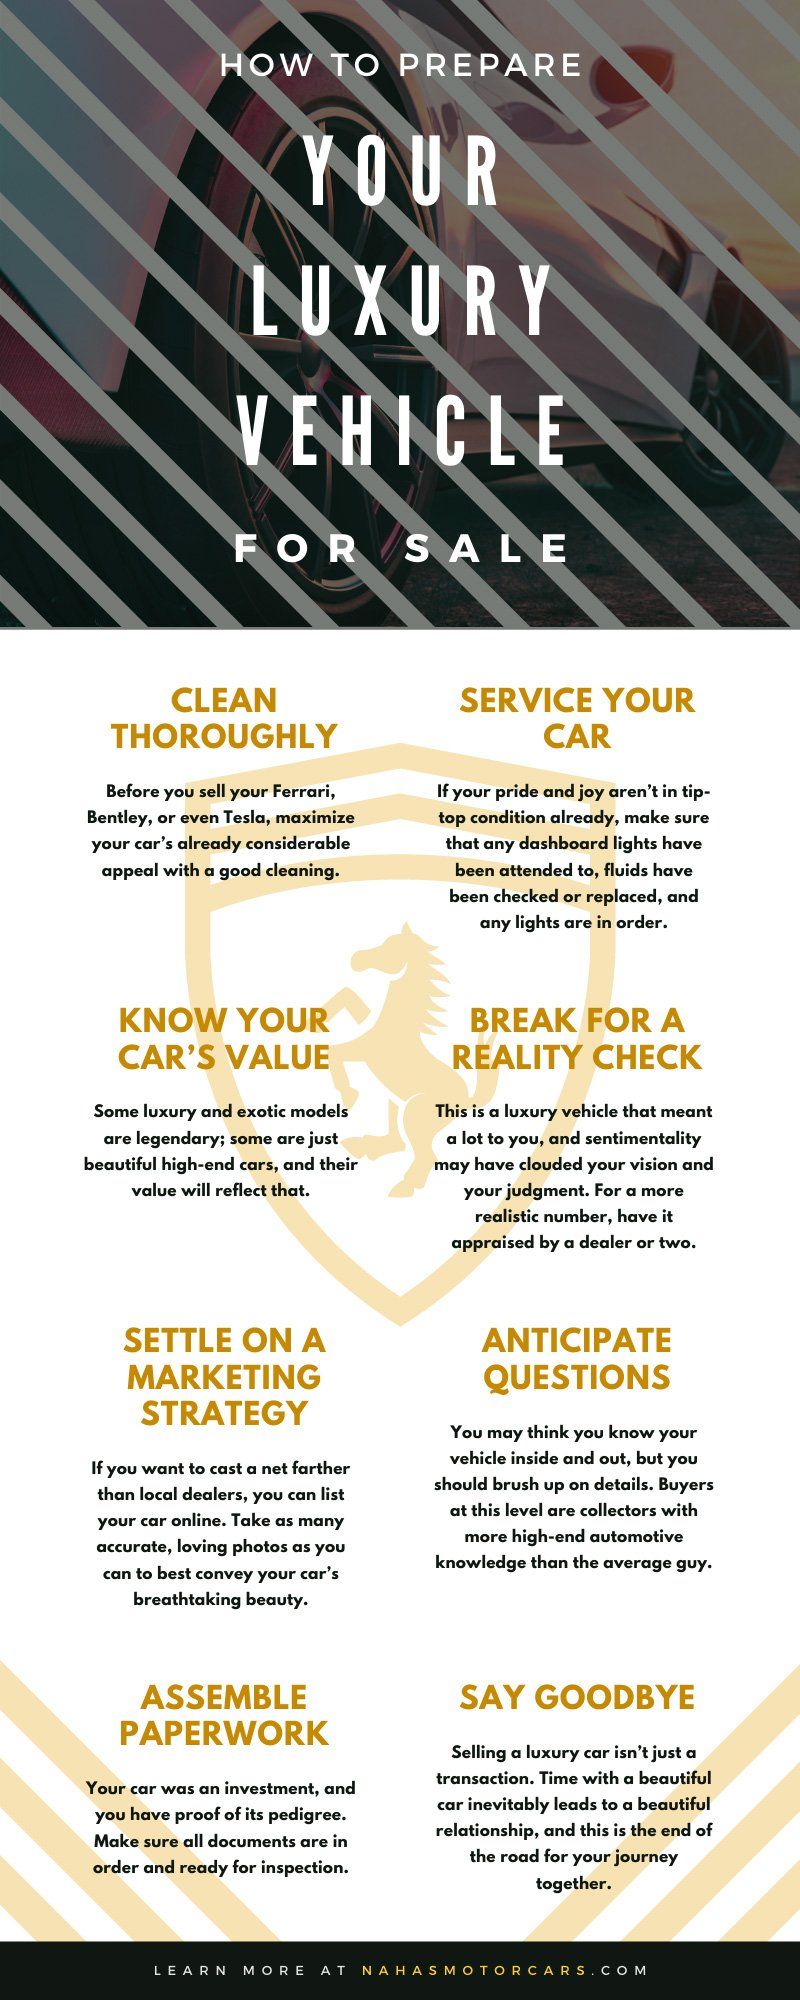 How To Prepare Your Luxury Vehicle for Sale